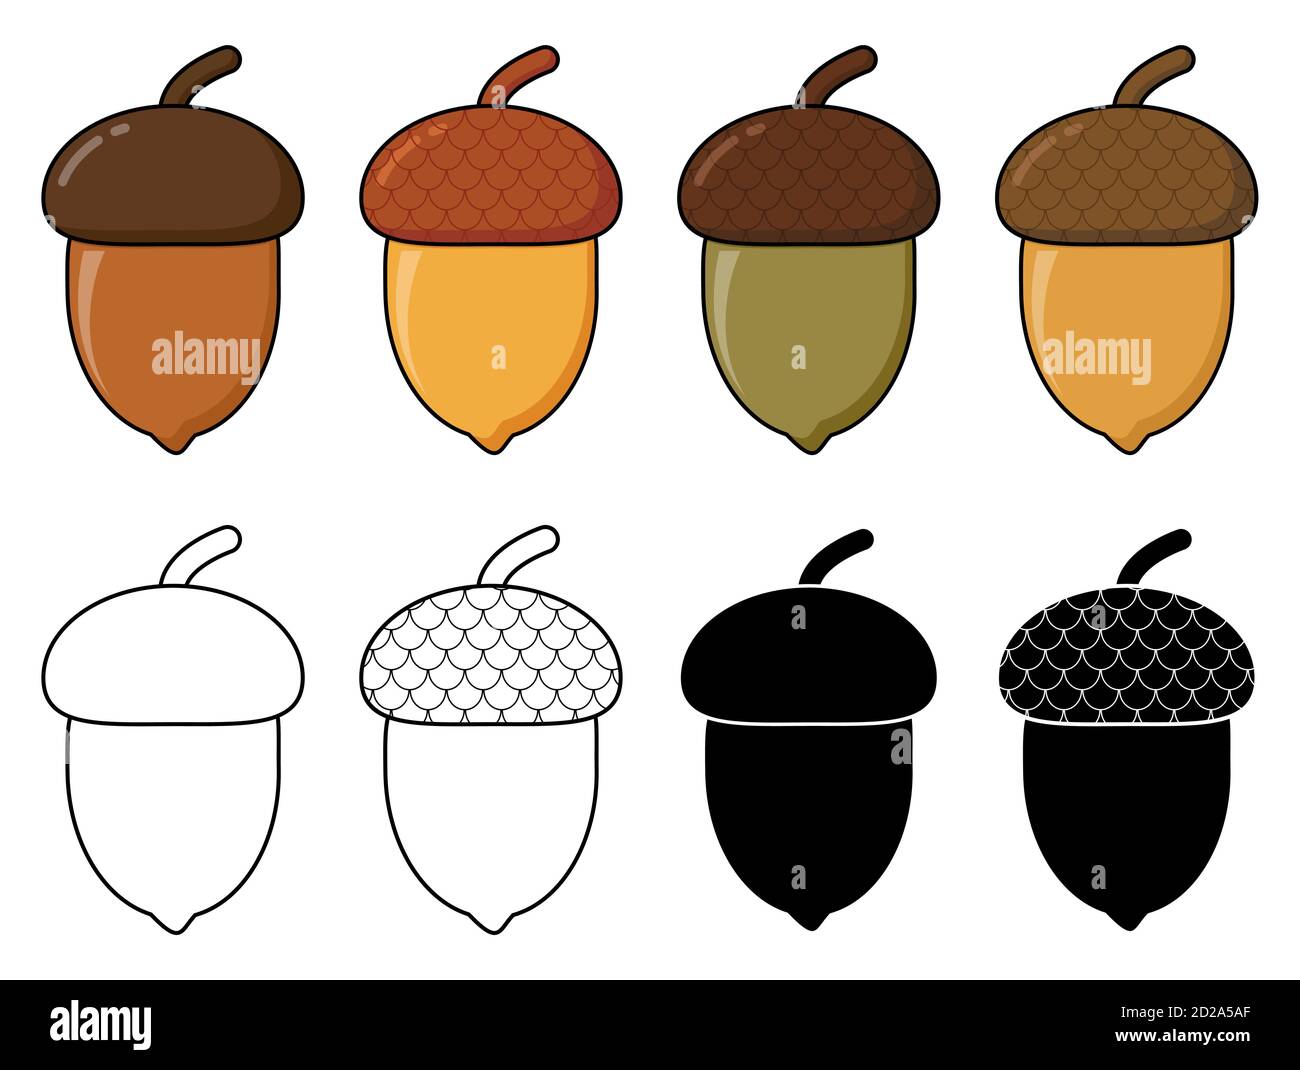 Acorn autumn drawing eps10 set. Oak nut cartoon illustration isolated on white.  Autumnal clip art with  oak tree fruits with cap. Oak acorns with she Stock Vector